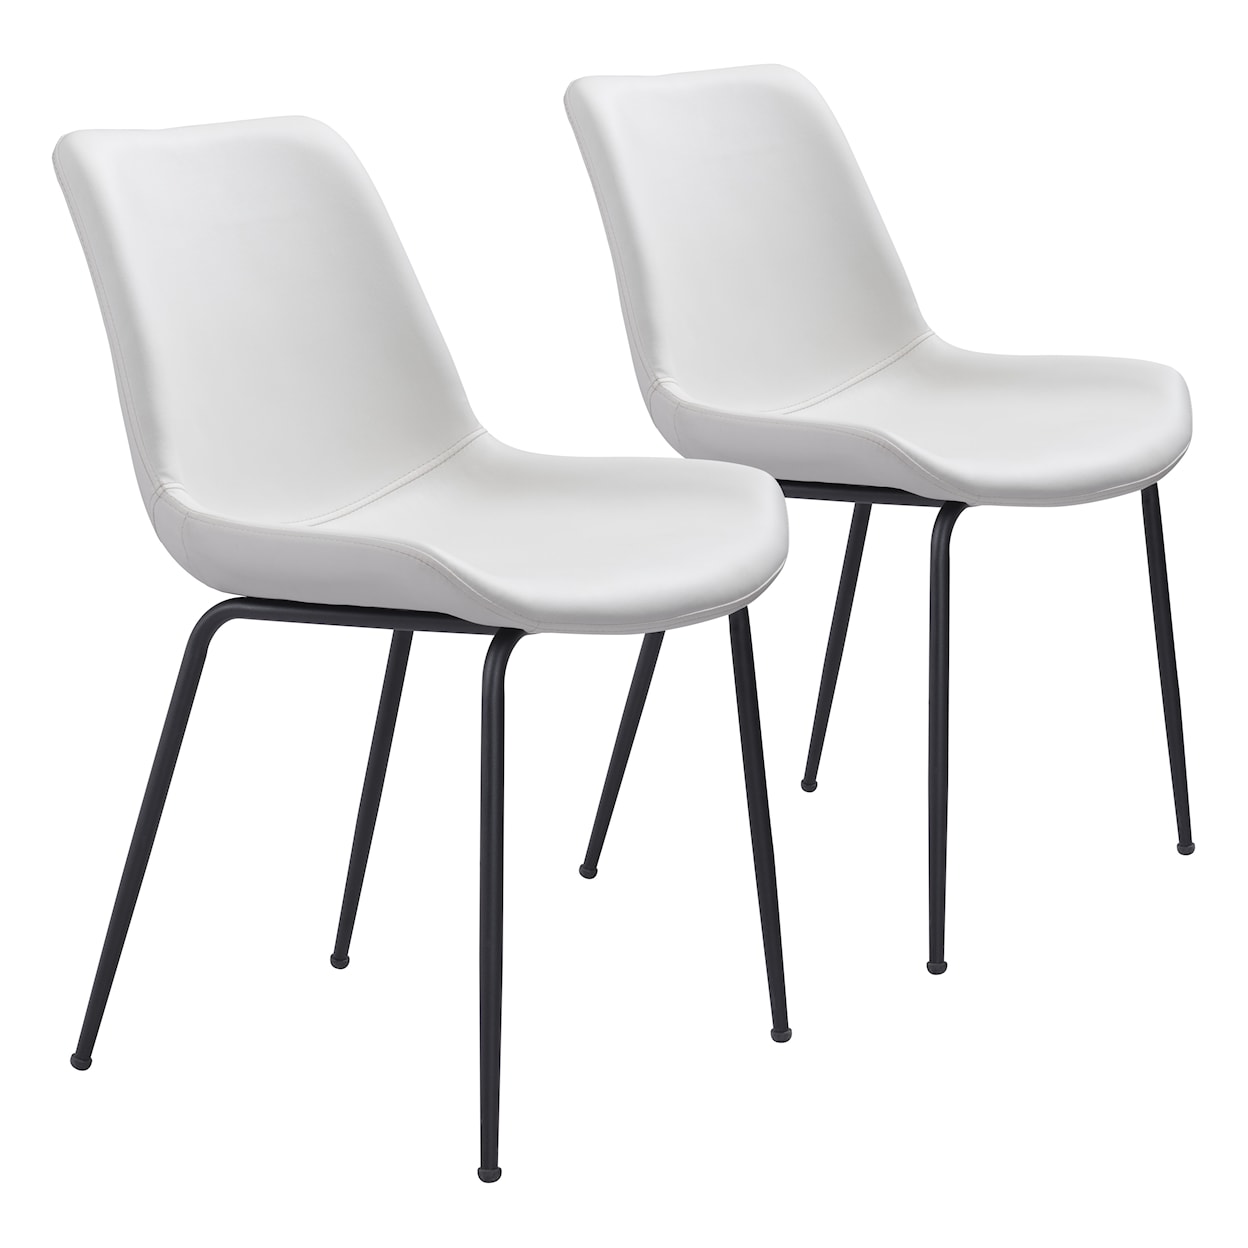 Zuo Byron Dining Chair Set